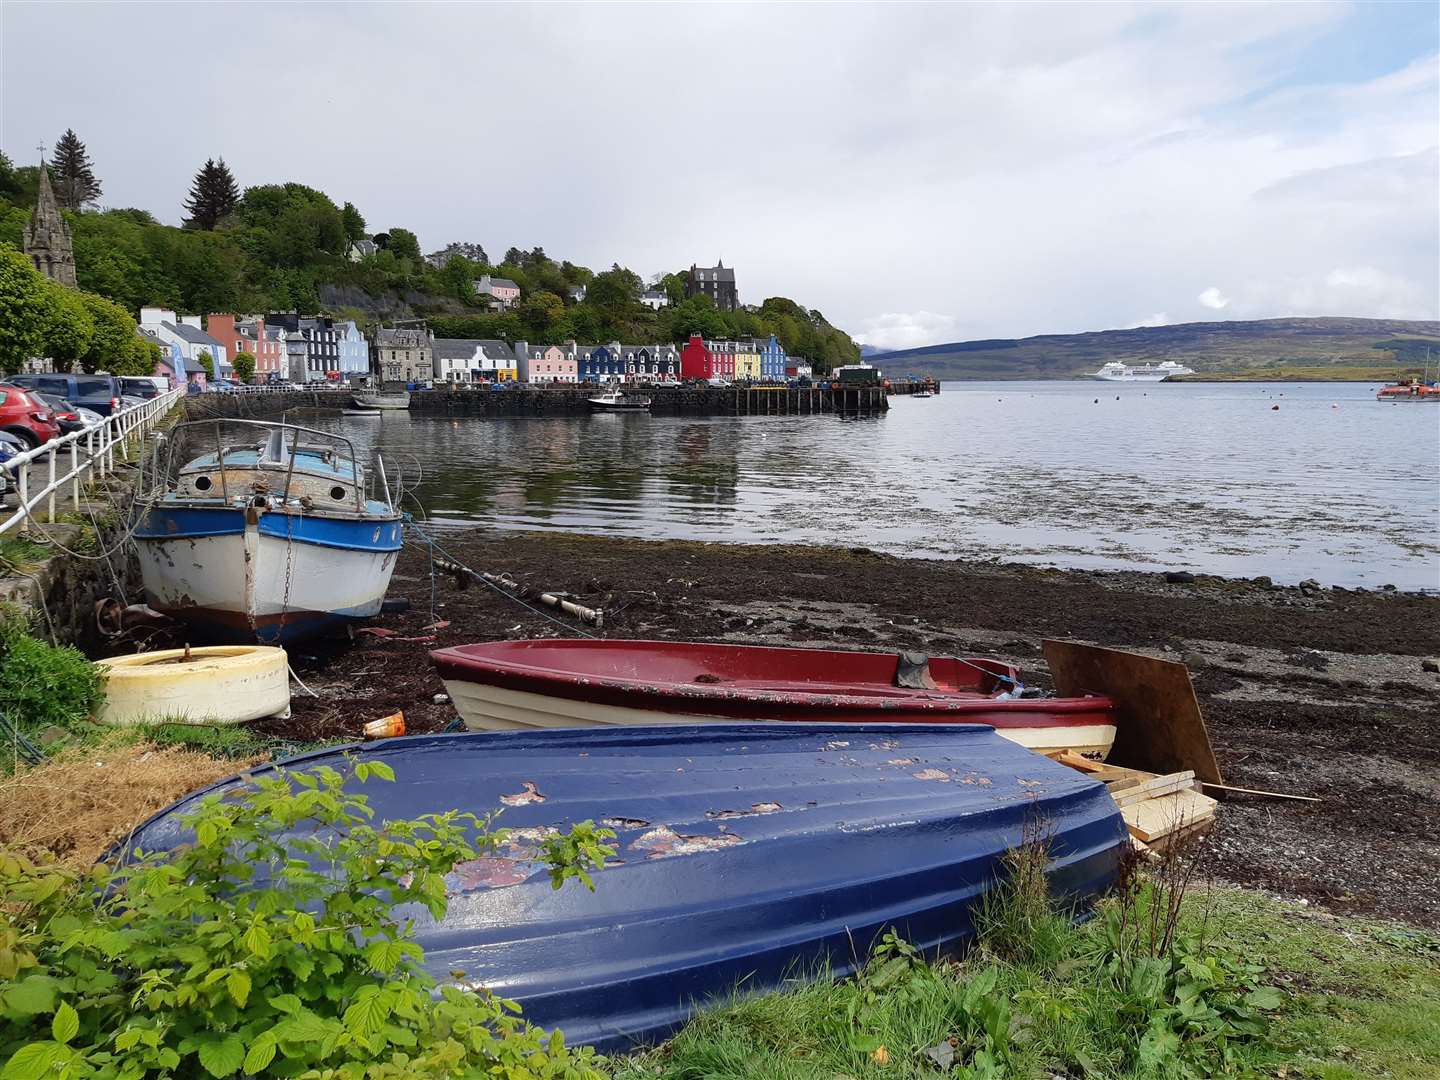 Tobermory, on the Isle of Mull, is picturesque with its colourful buildings (12429369)